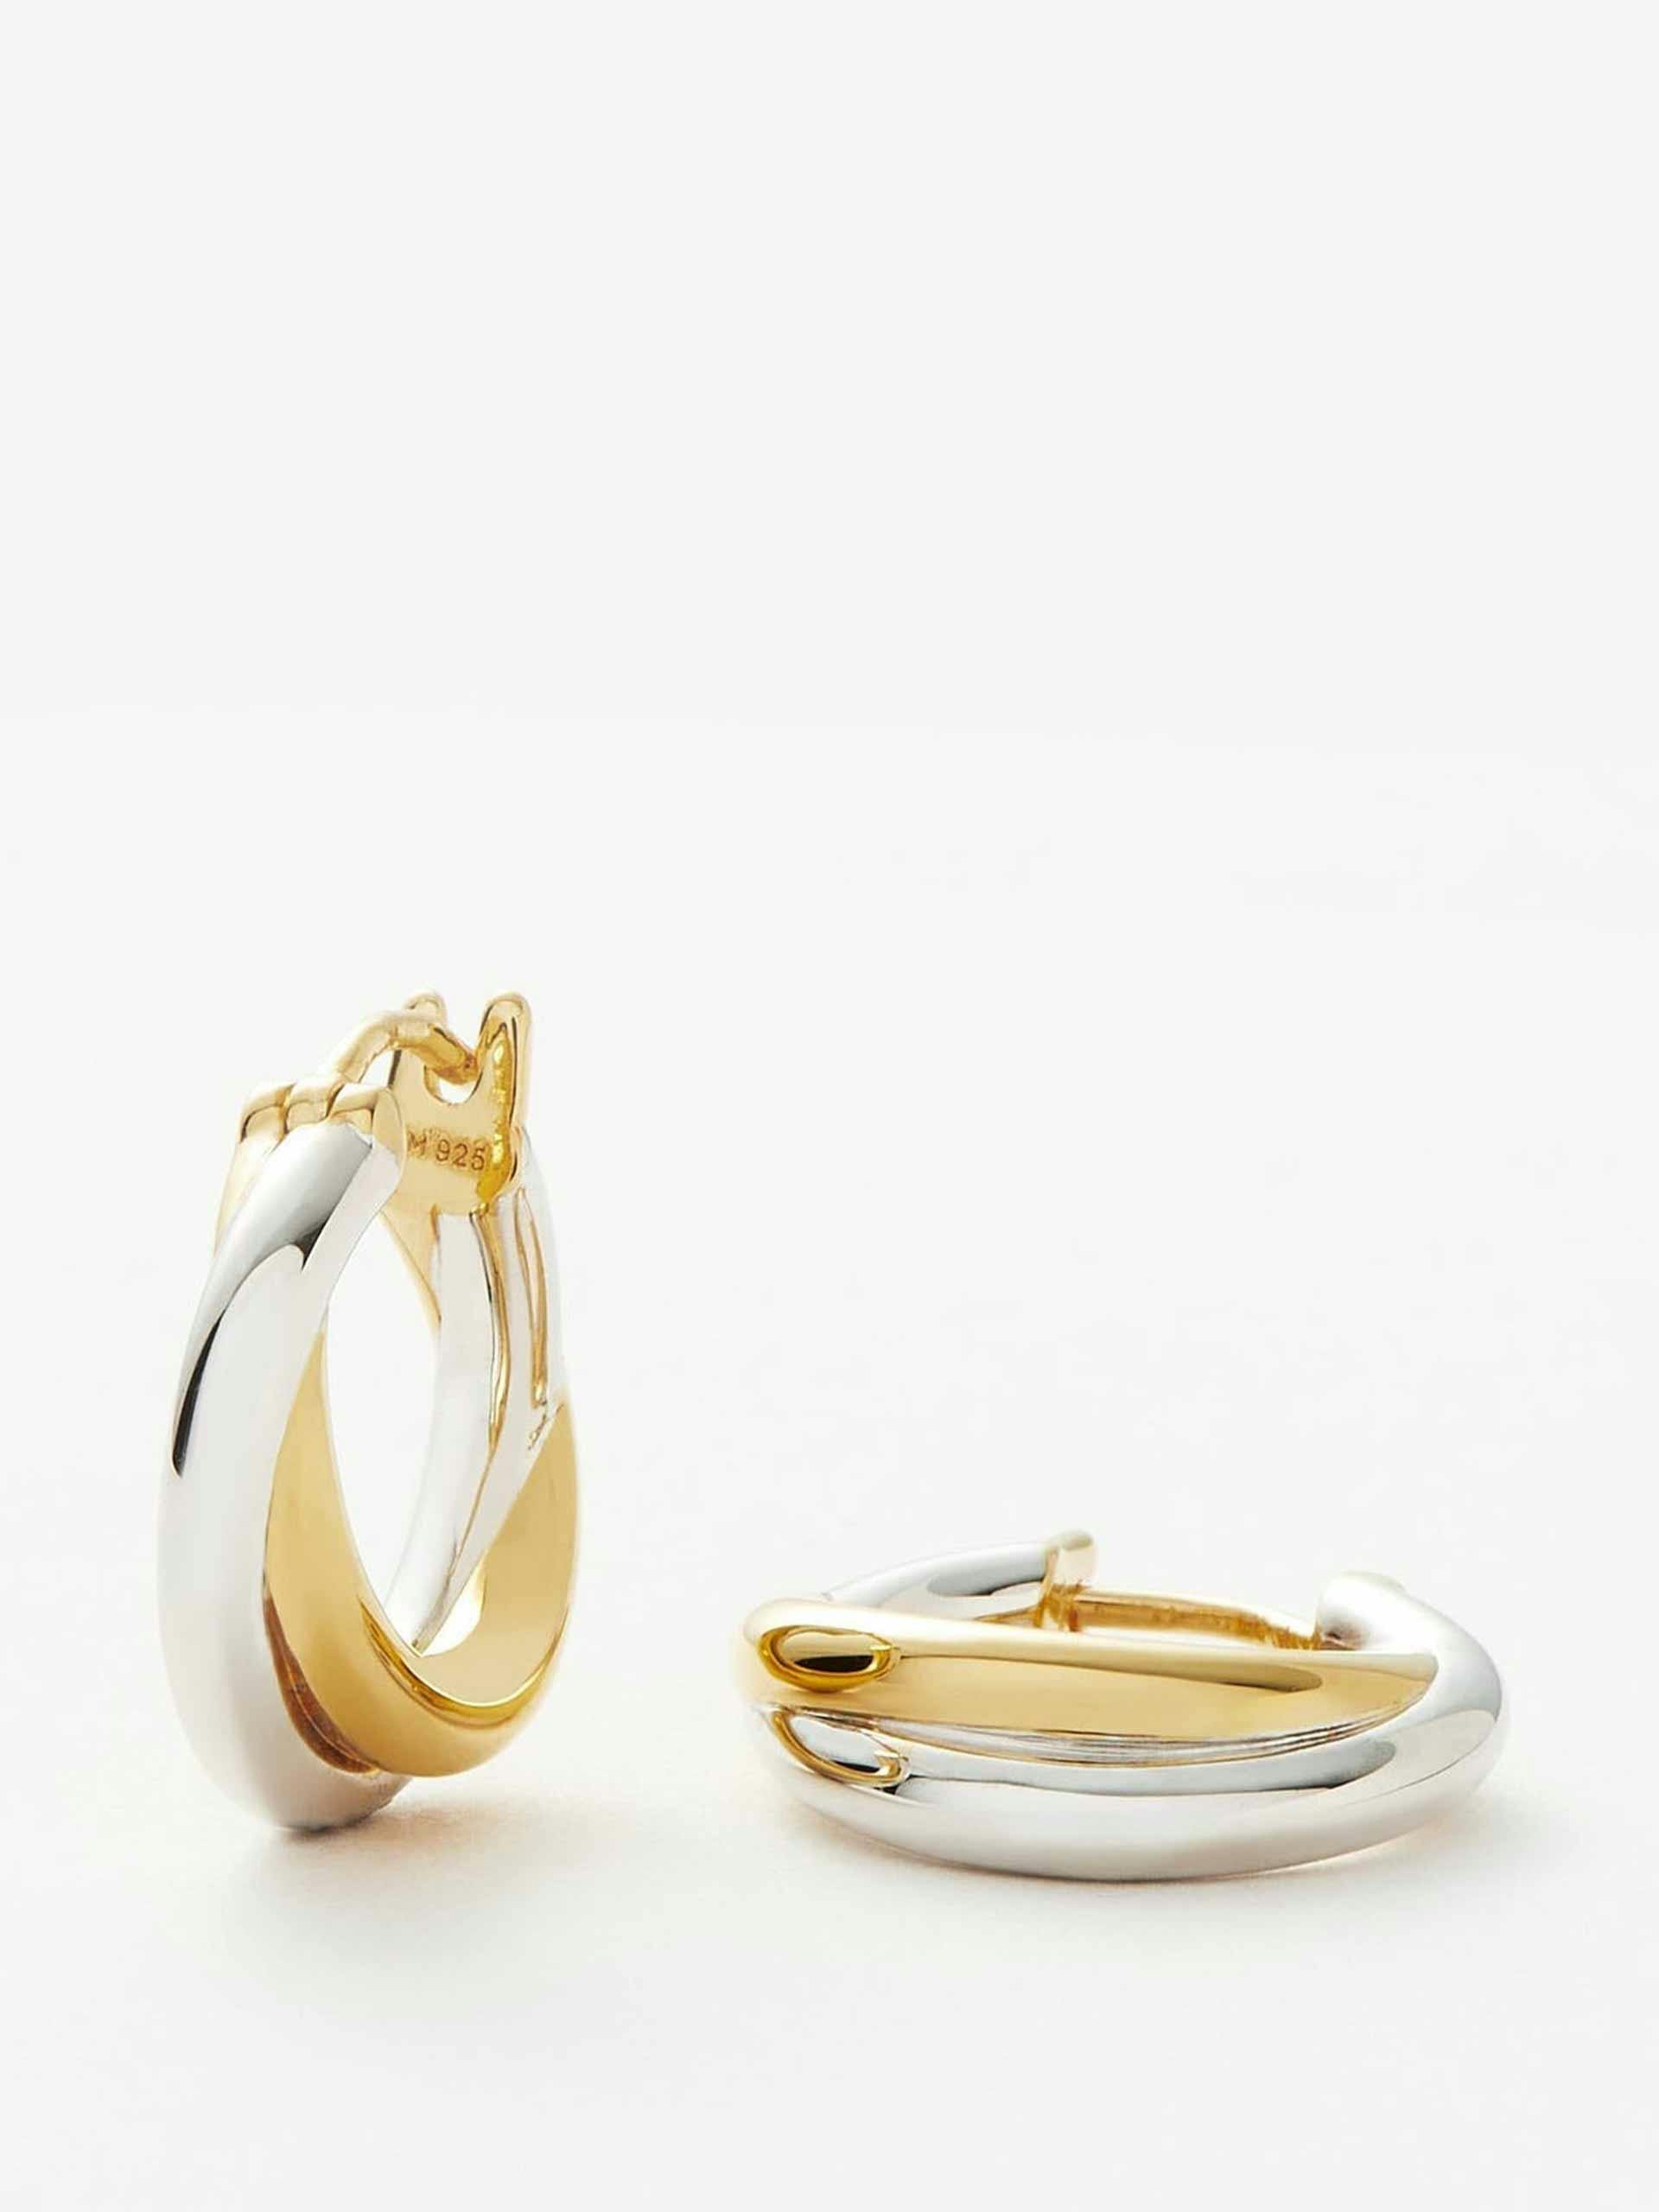 Gold and silver tone hoop earrings